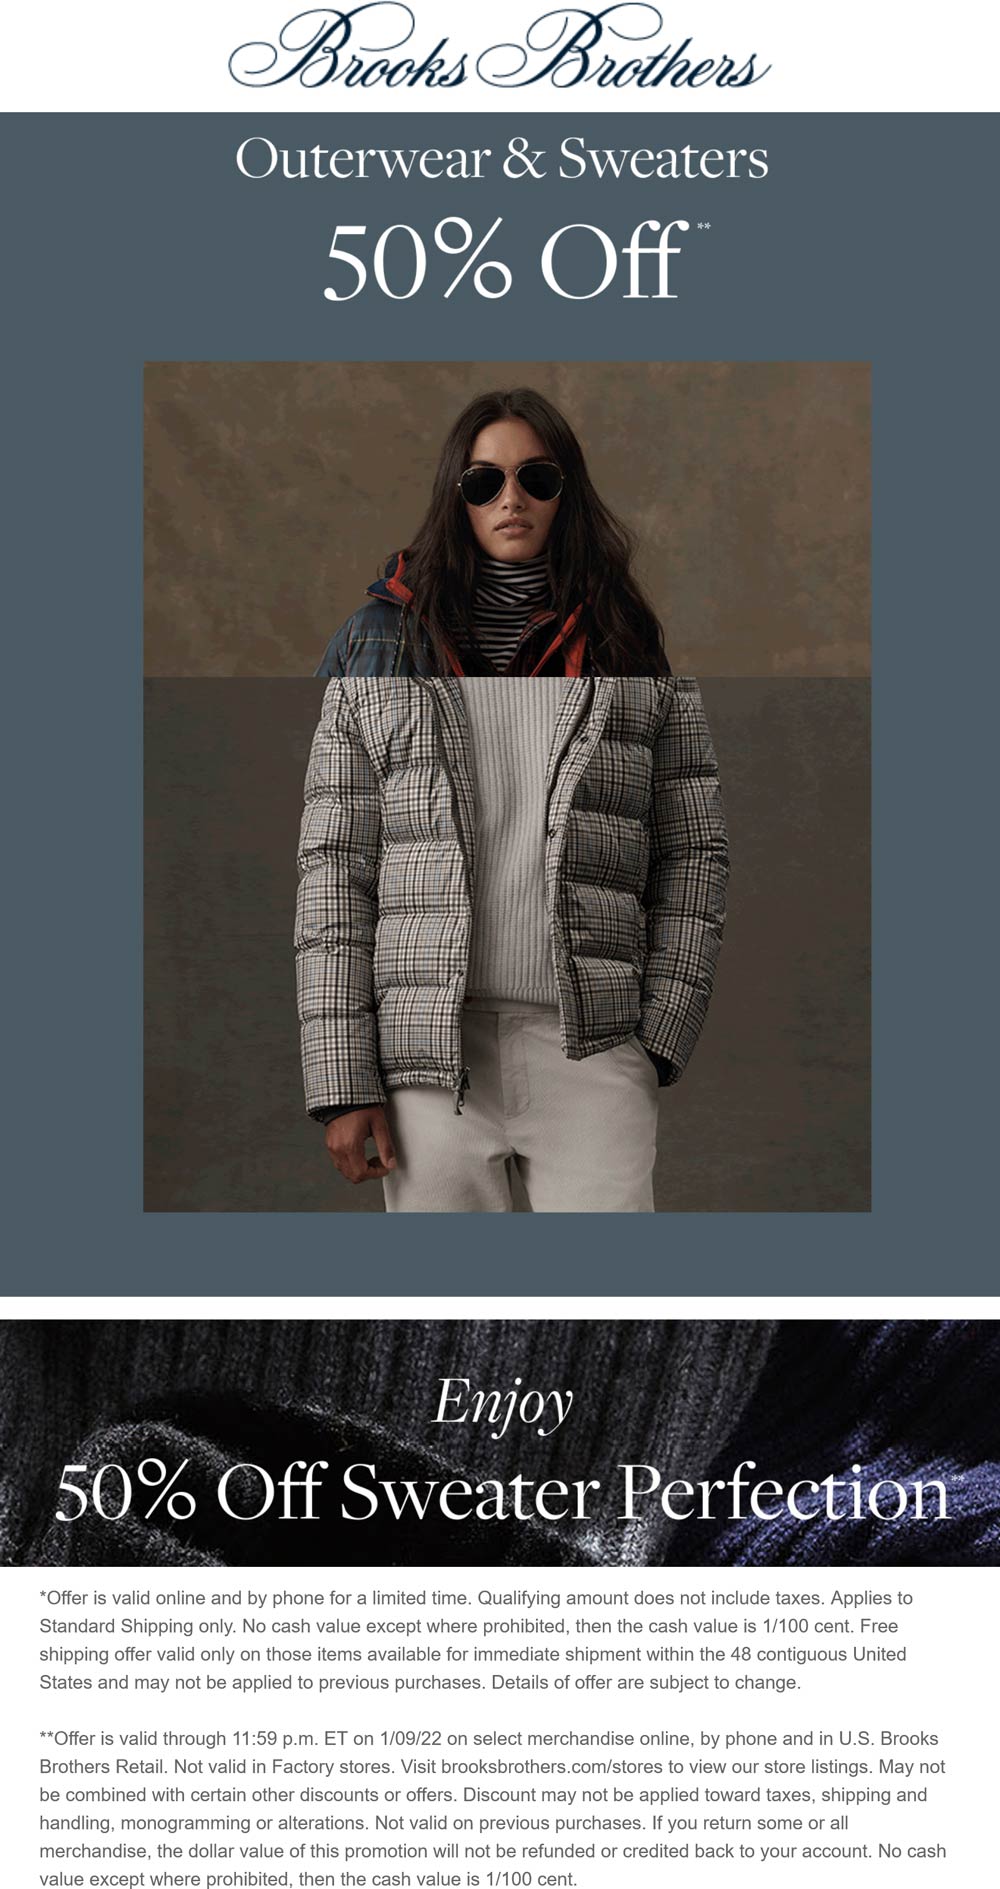 Brooks Brothers stores Coupon  50% off outerwear & sweaters at Brooks Brothers, ditto online #brooksbrothers 